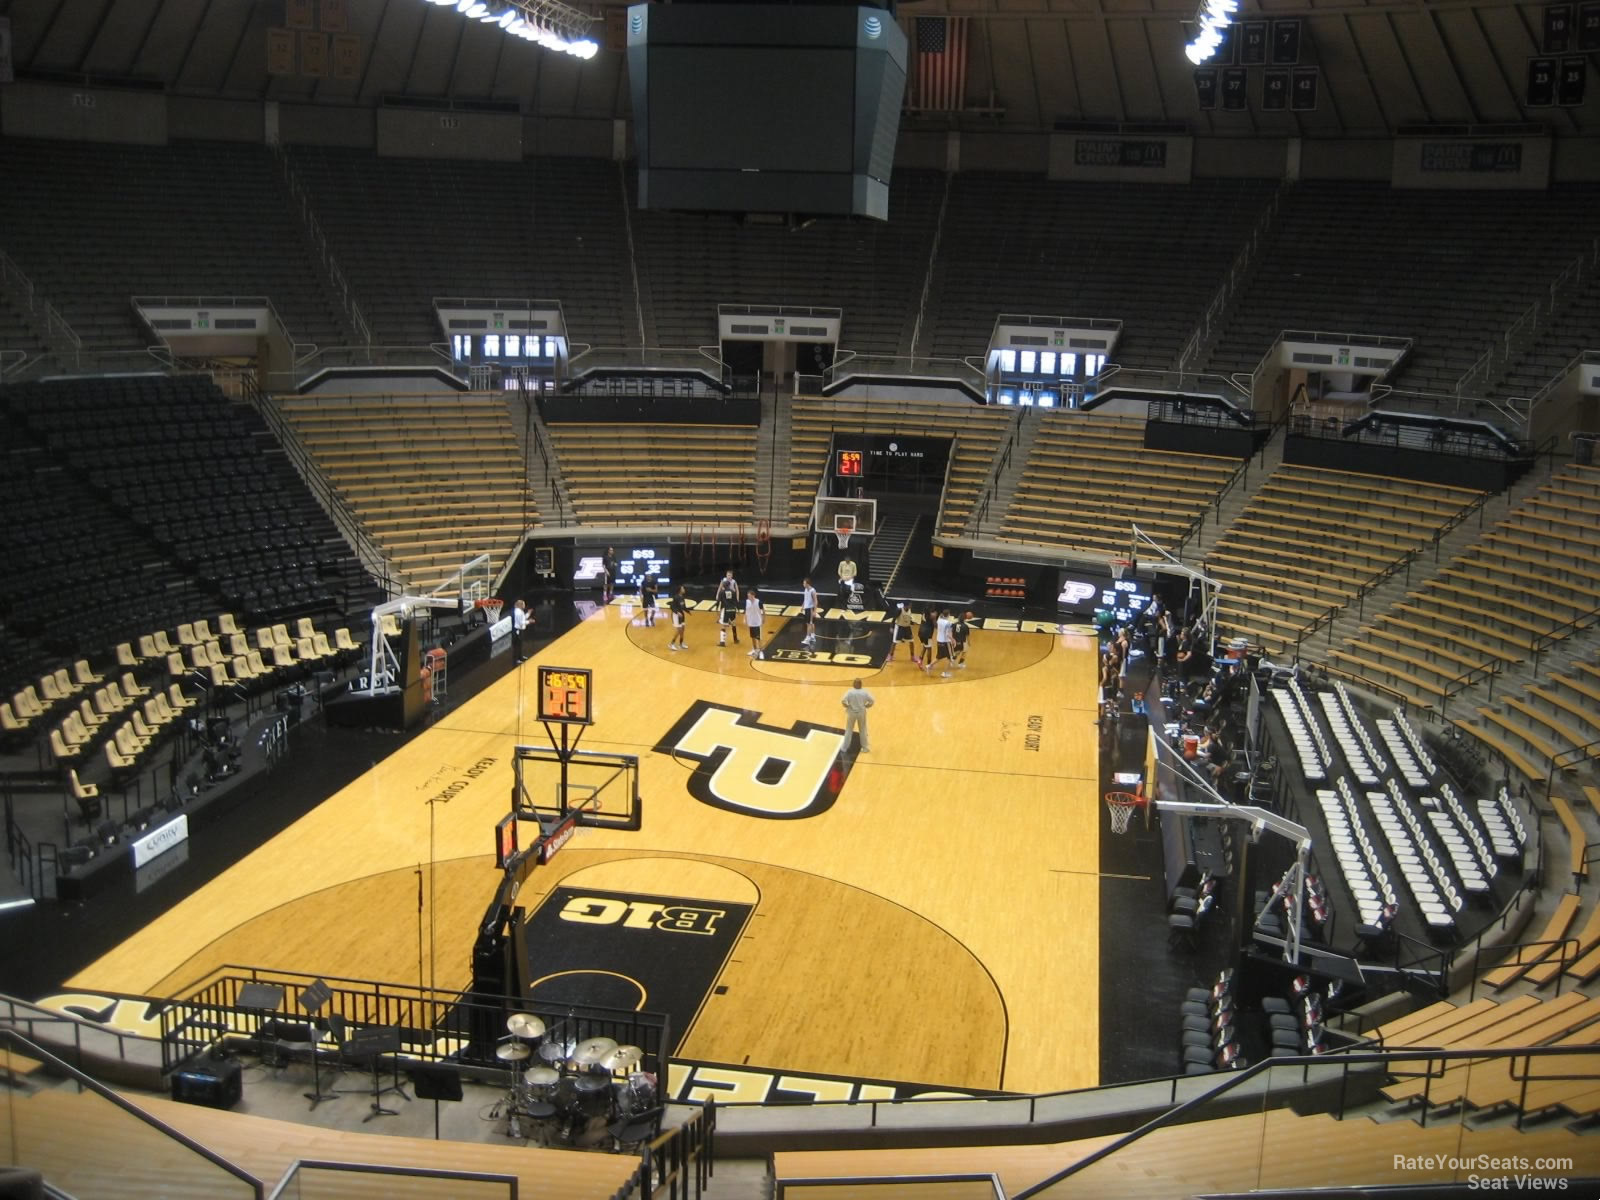 section 106, row 10 seat view  - mackey arena